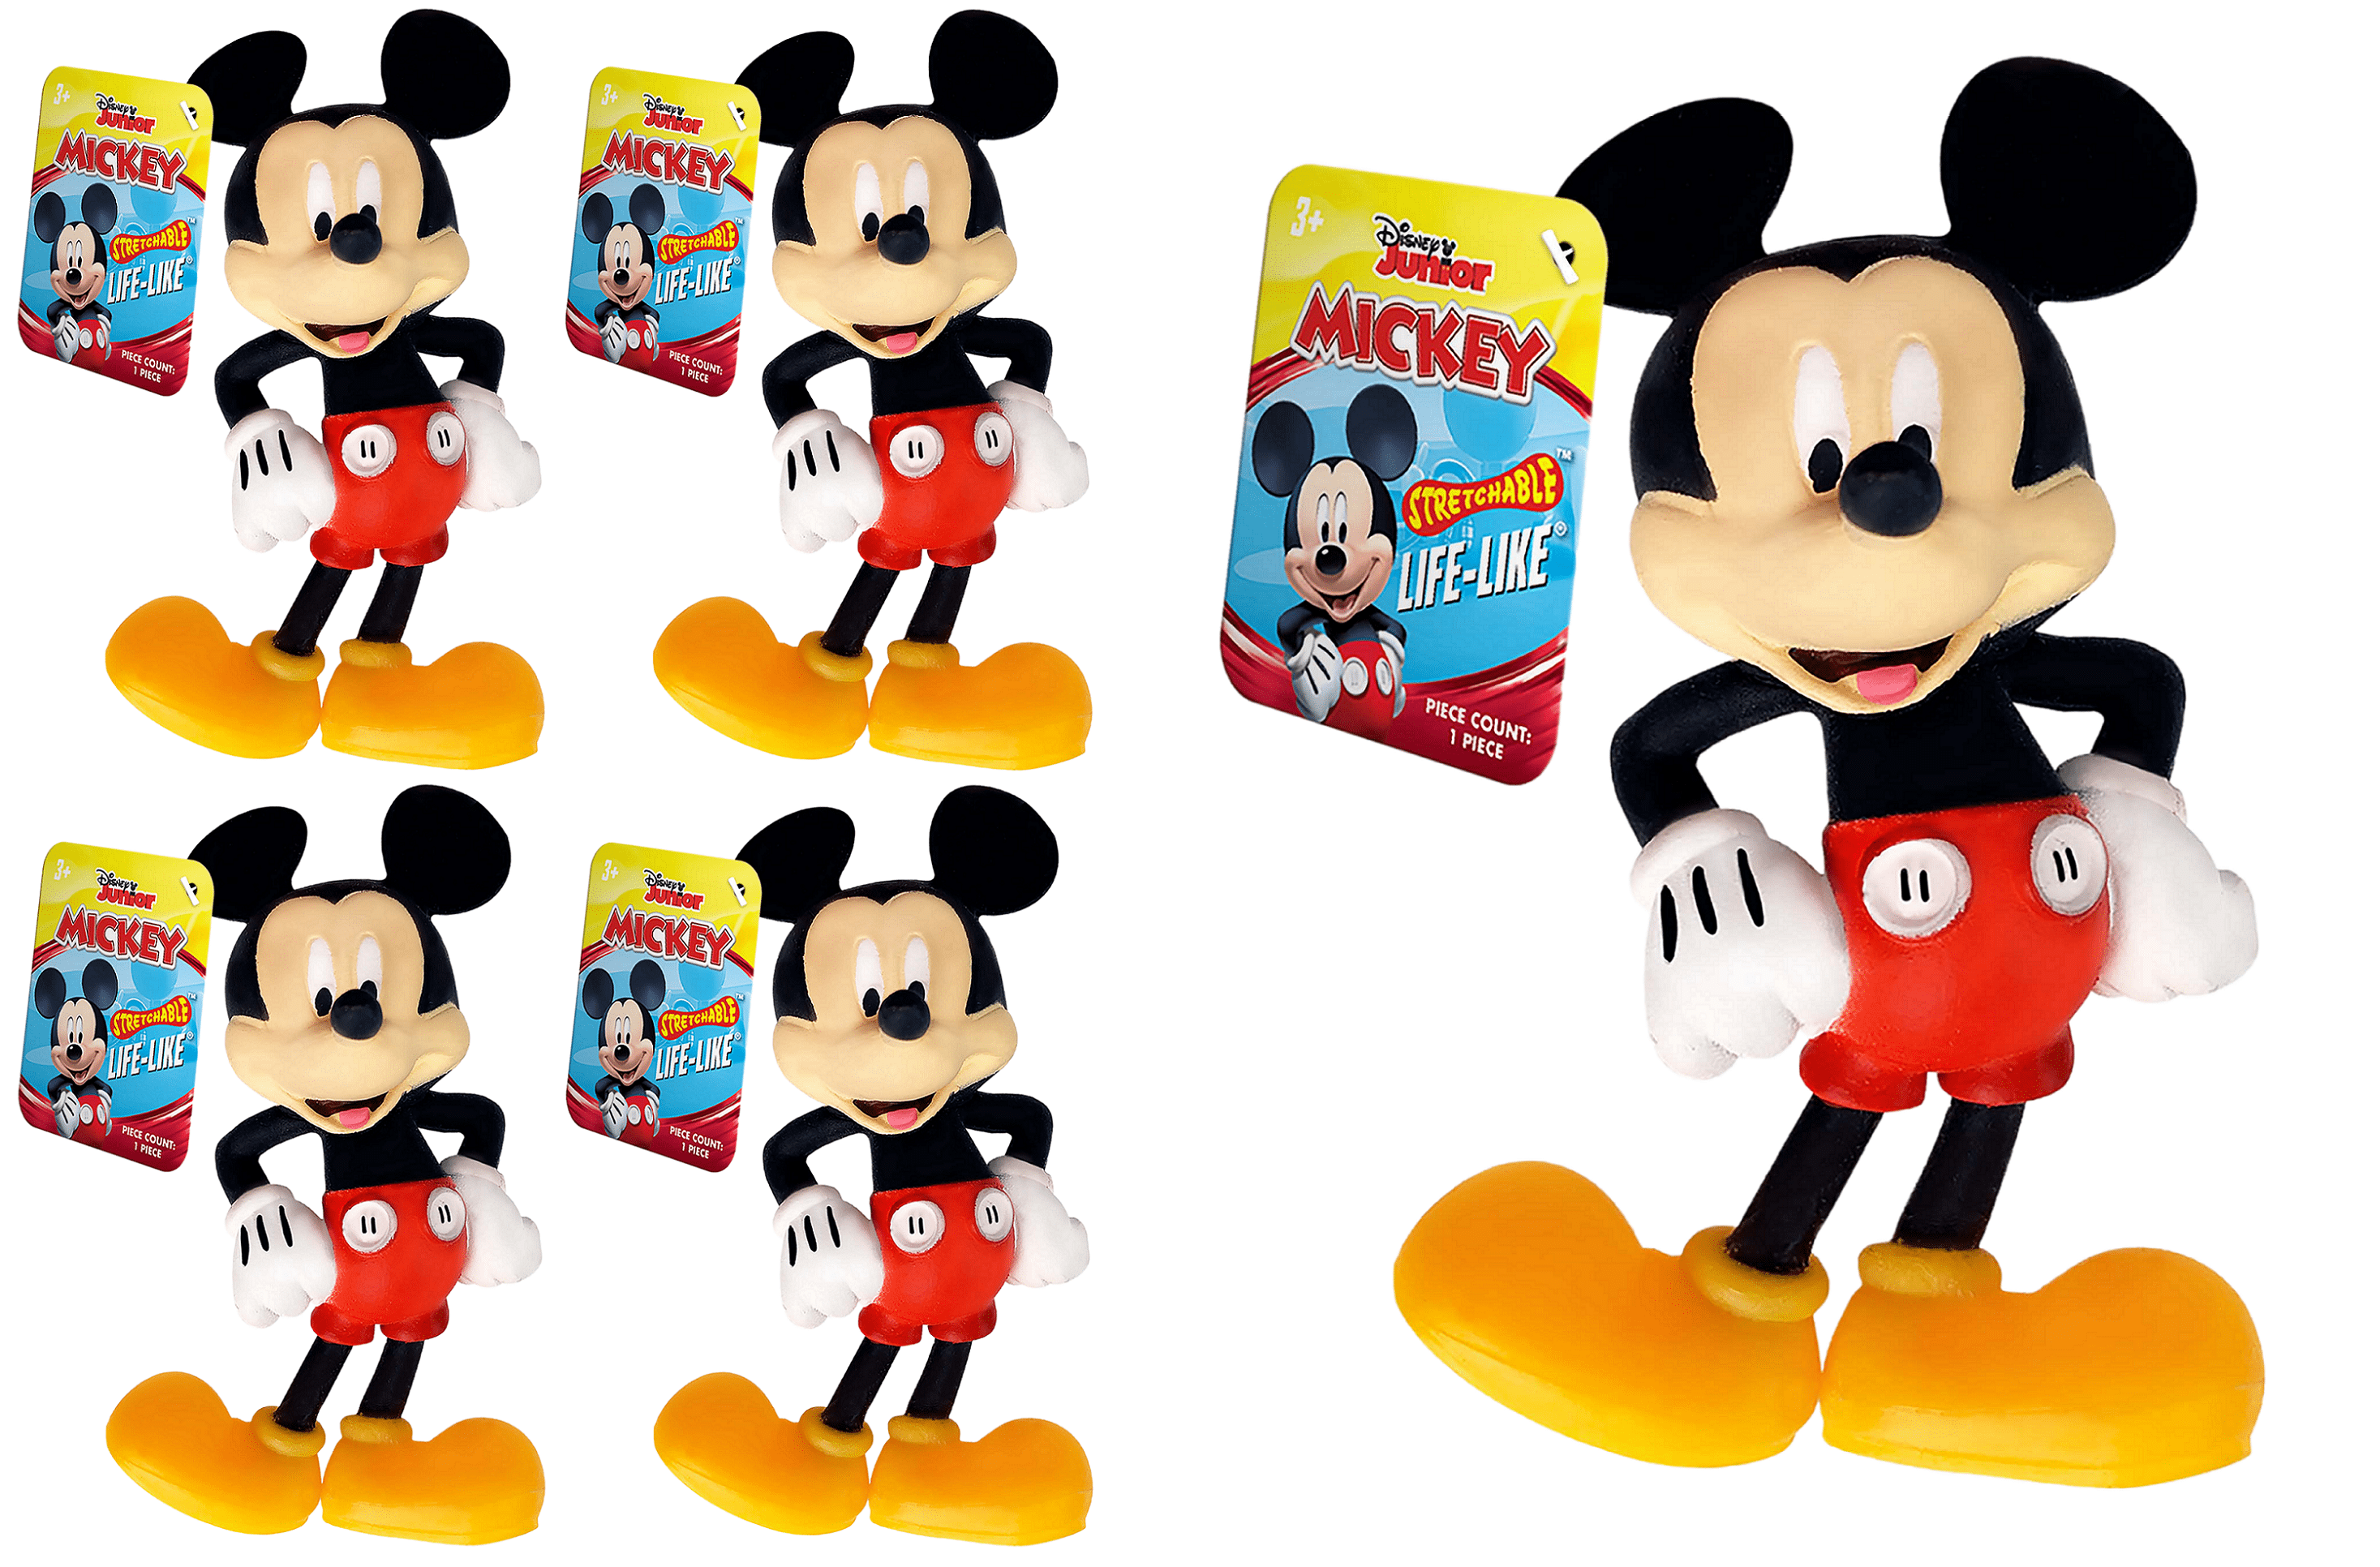 JA-RU Disney Stretchy Toys Mickey & Minnie Figures Squish & Pull Toys (4  Mickey Figure) Clubhouse Disney Anxiety Calming Fidget Toy, Stress Toys,  Birthday Party Gifts for Kids, Boys & Girls W-A-6900-4 -